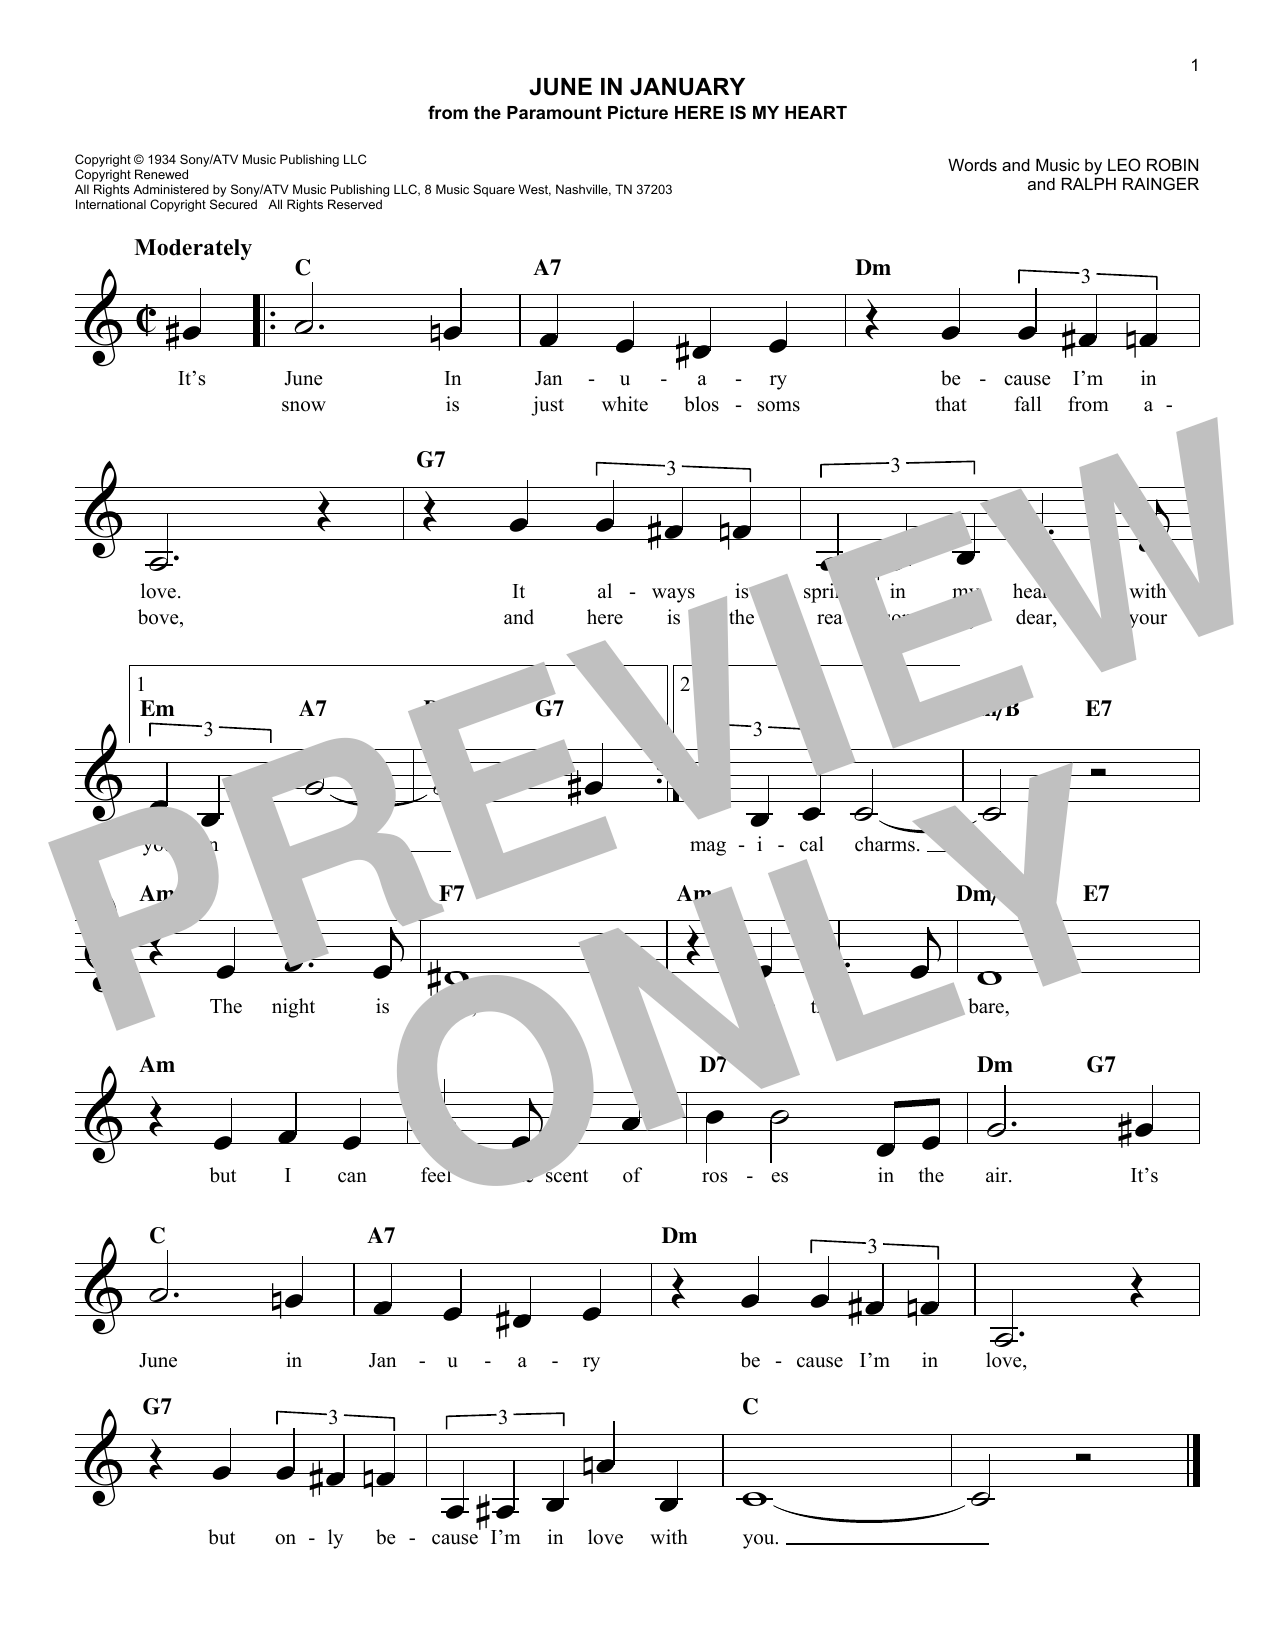 Lucy Ann Polk June In January sheet music notes and chords. Download Printable PDF.